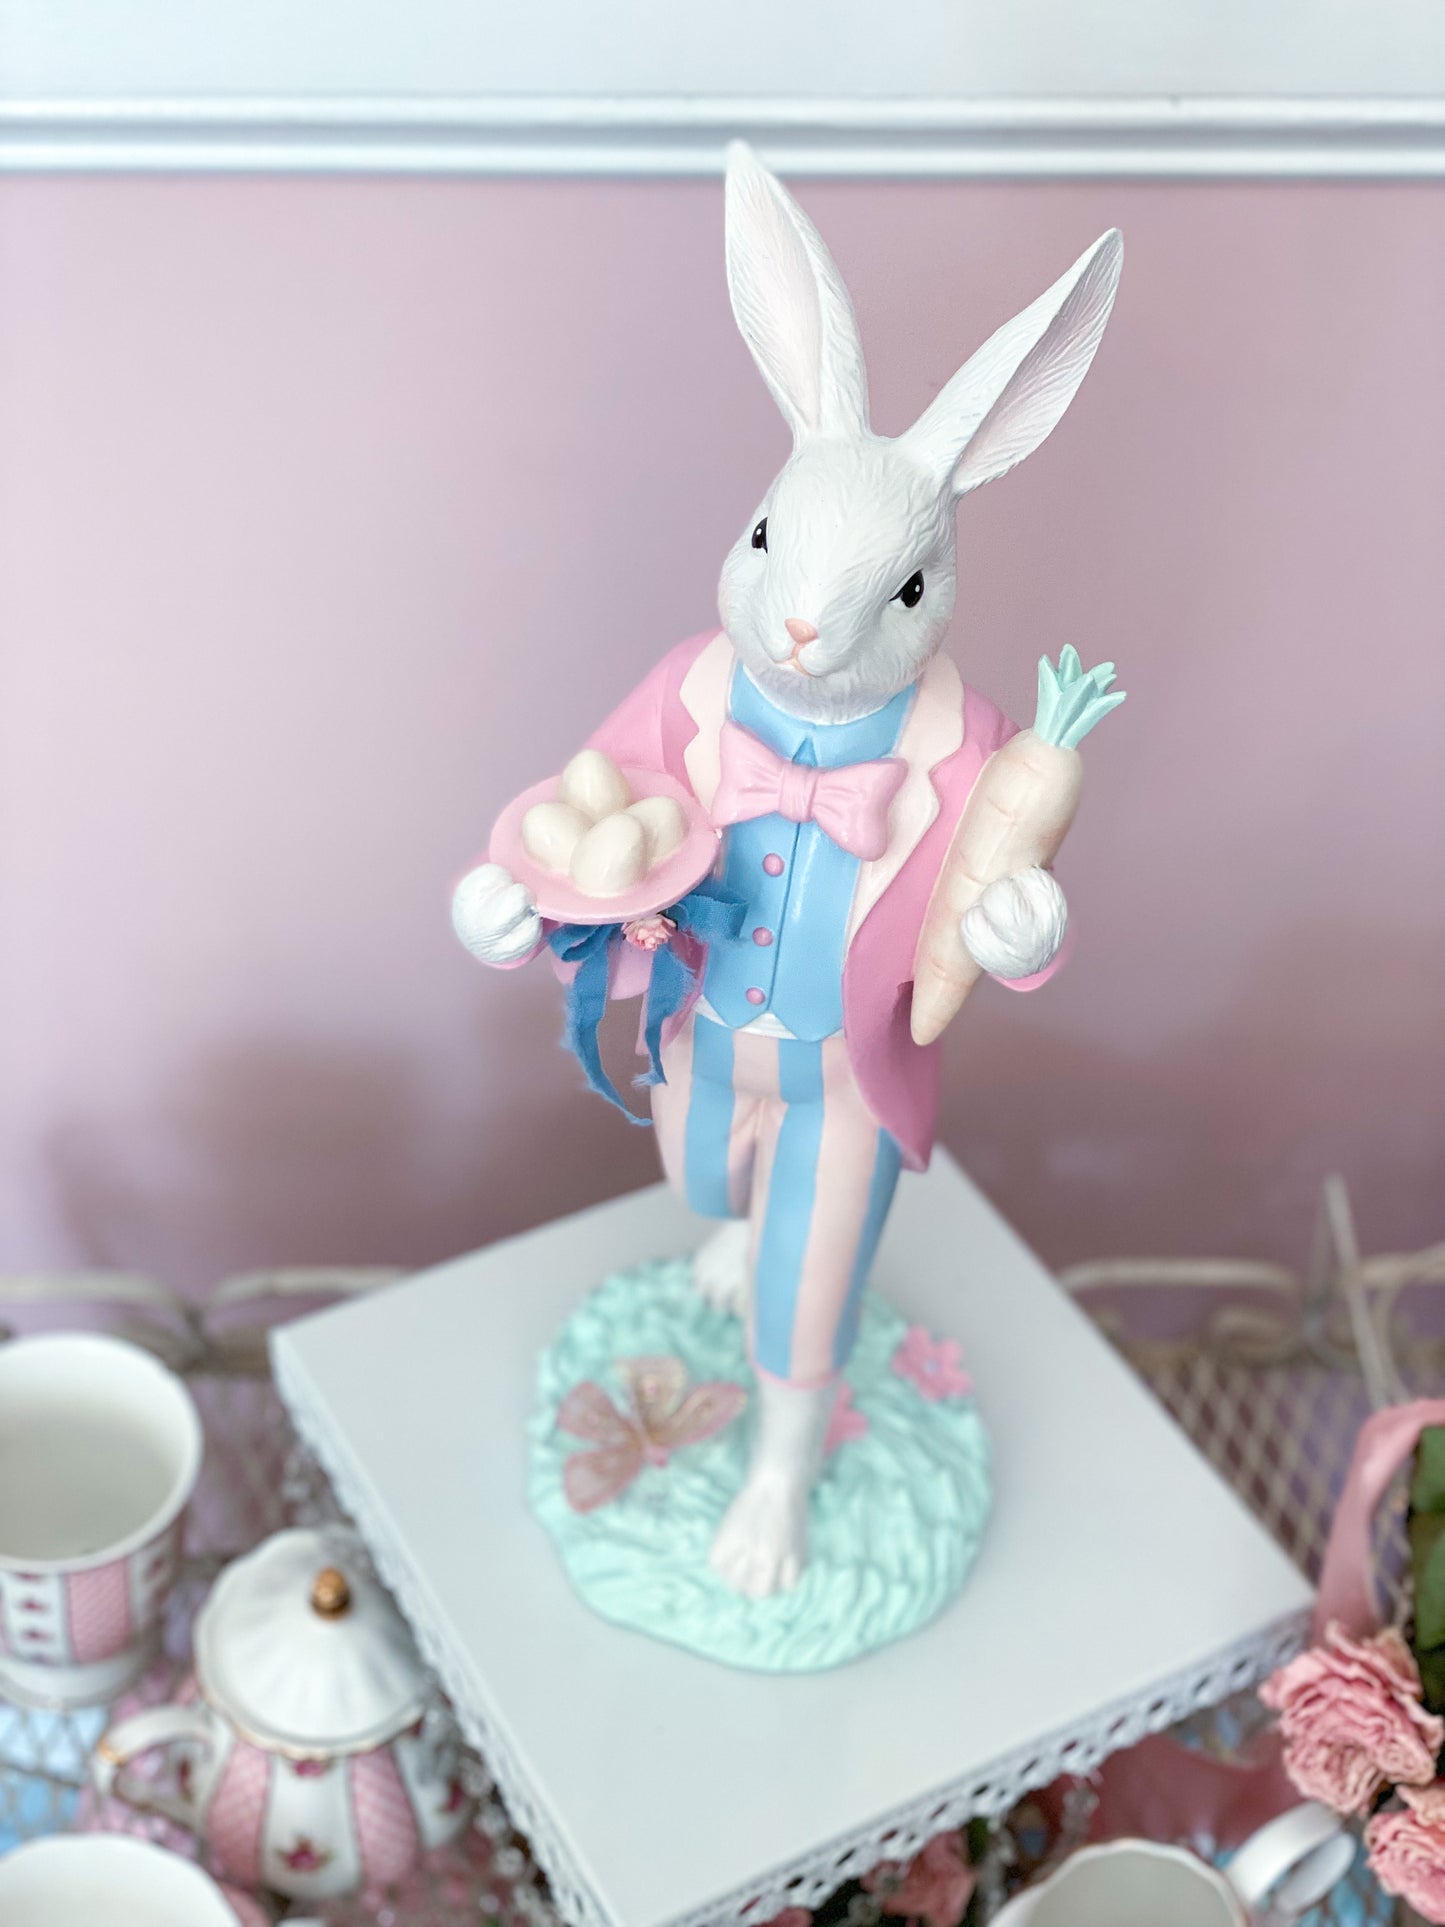 GLOW-UP COMMISSION: Bespoke Hand Painted Pastel Bridgerton Easter Bunny with top Hat and Tailcoat